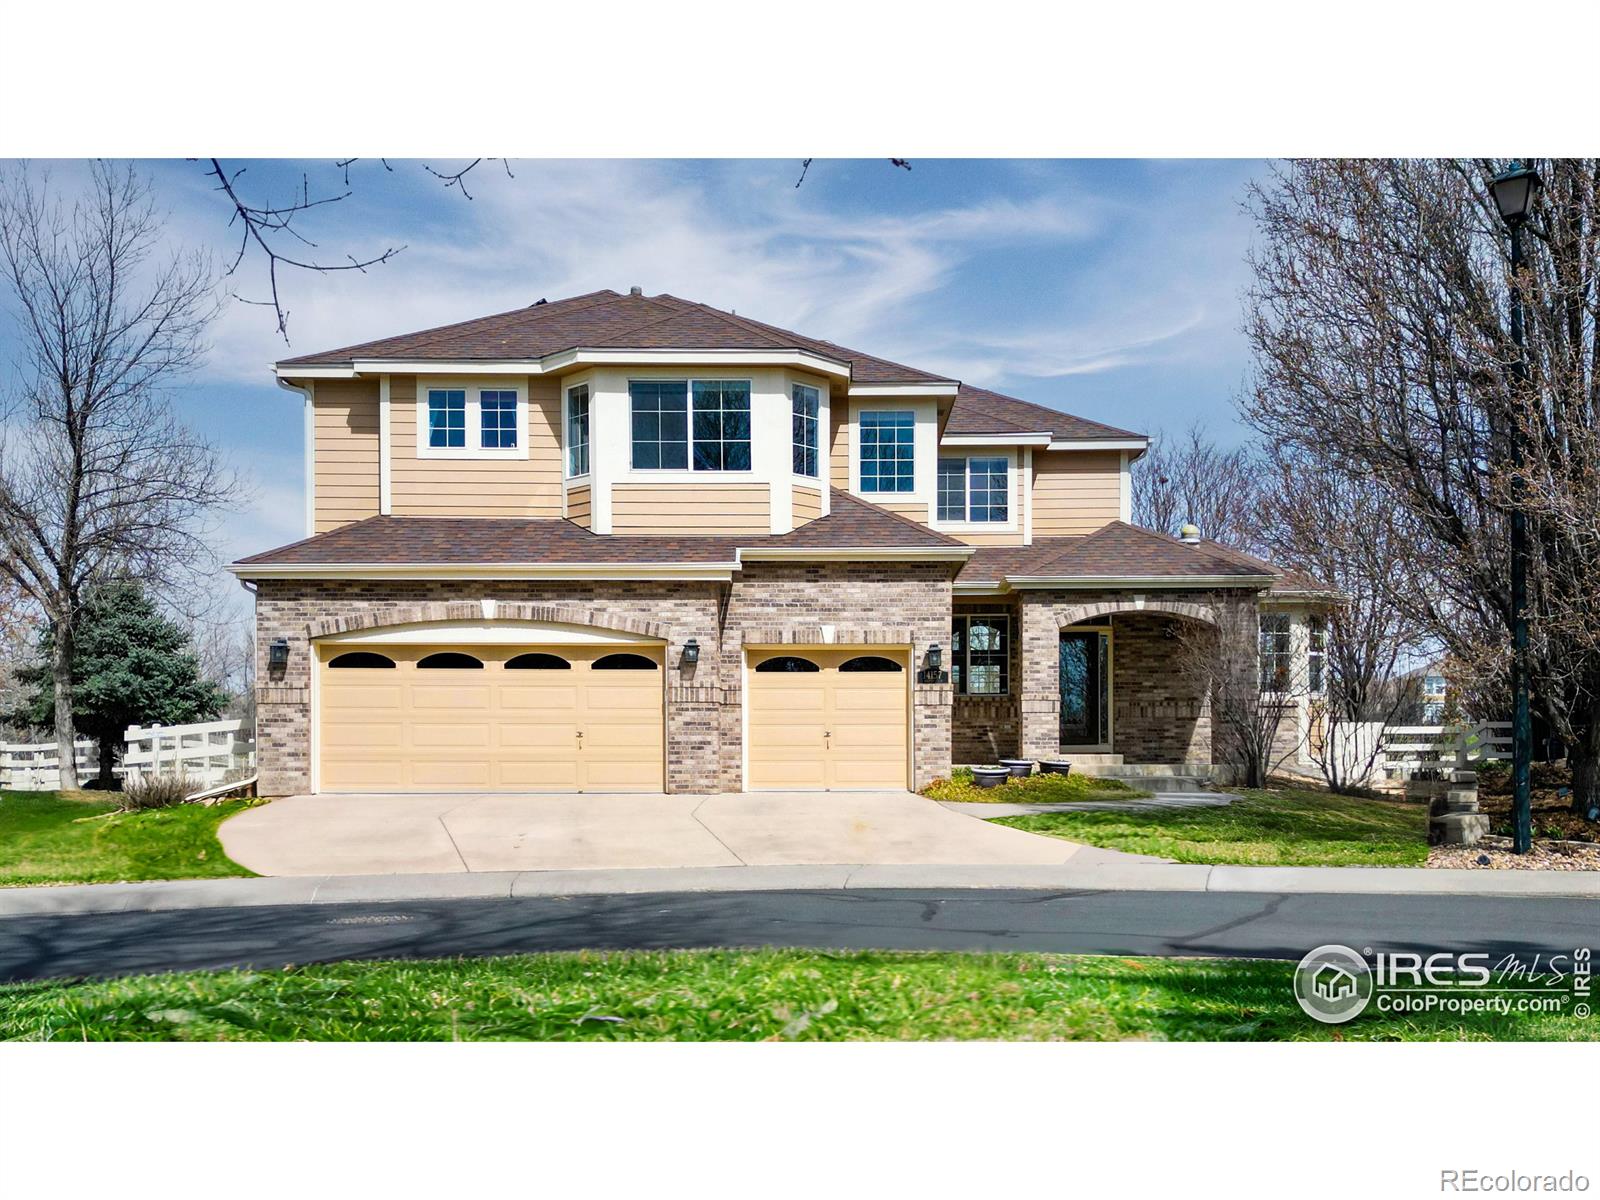 14157  Whitney Circle, broomfield MLS: 4567891006487 Beds: 4 Baths: 5 Price: $1,125,000